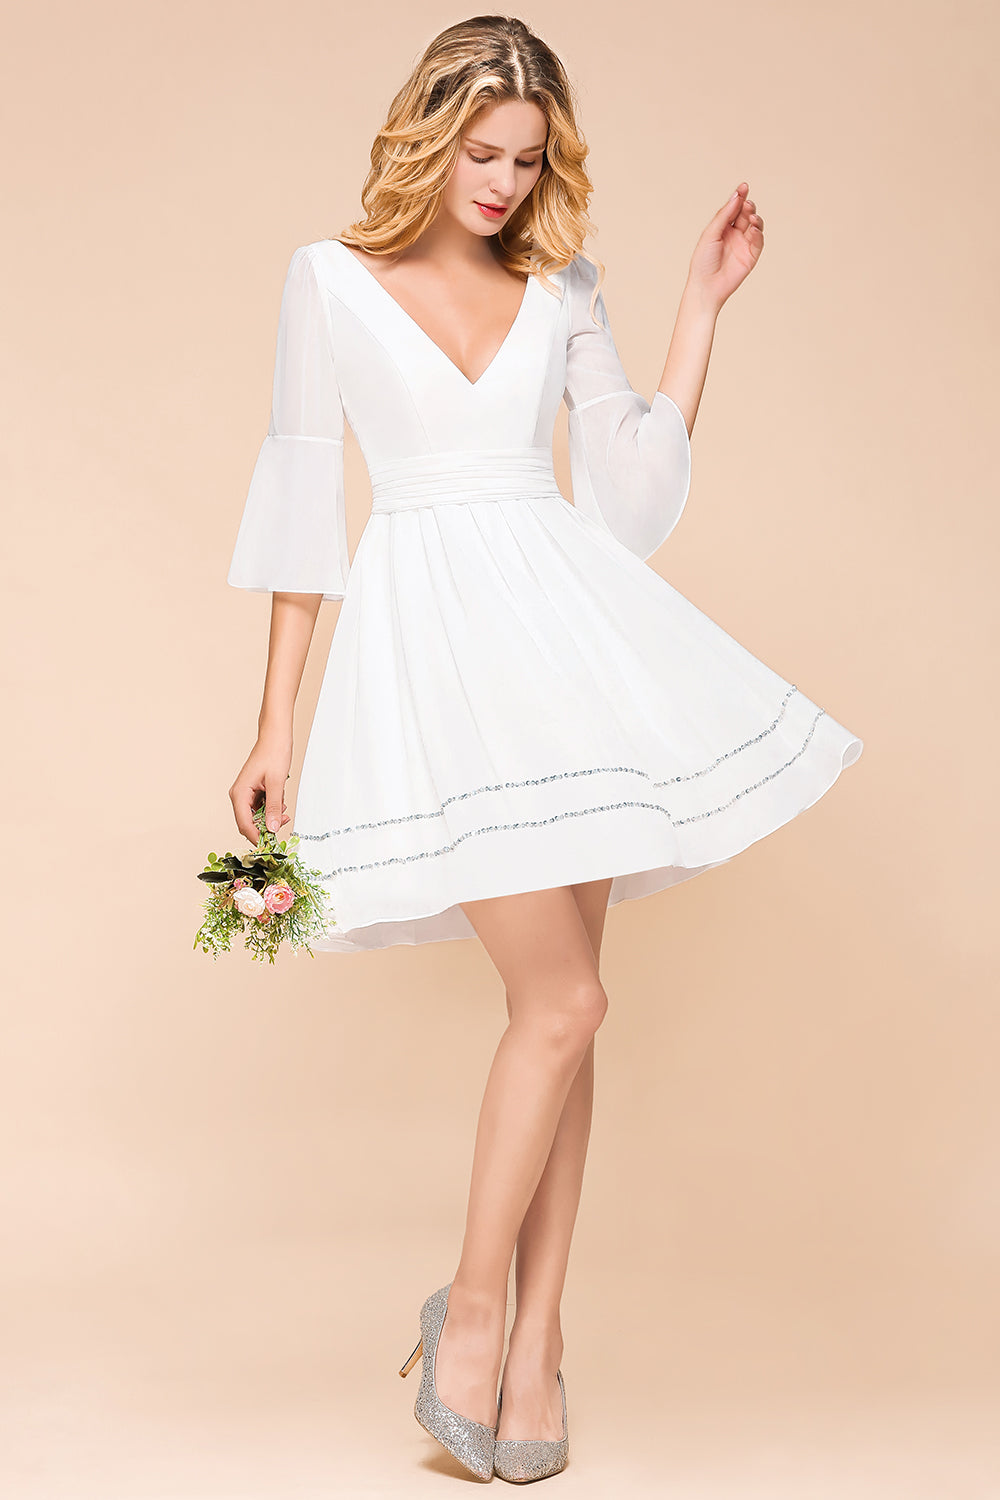 Chic V-Neck 3/4 Sleeves Short White Bridesmaid Dress with Sequins-27dress